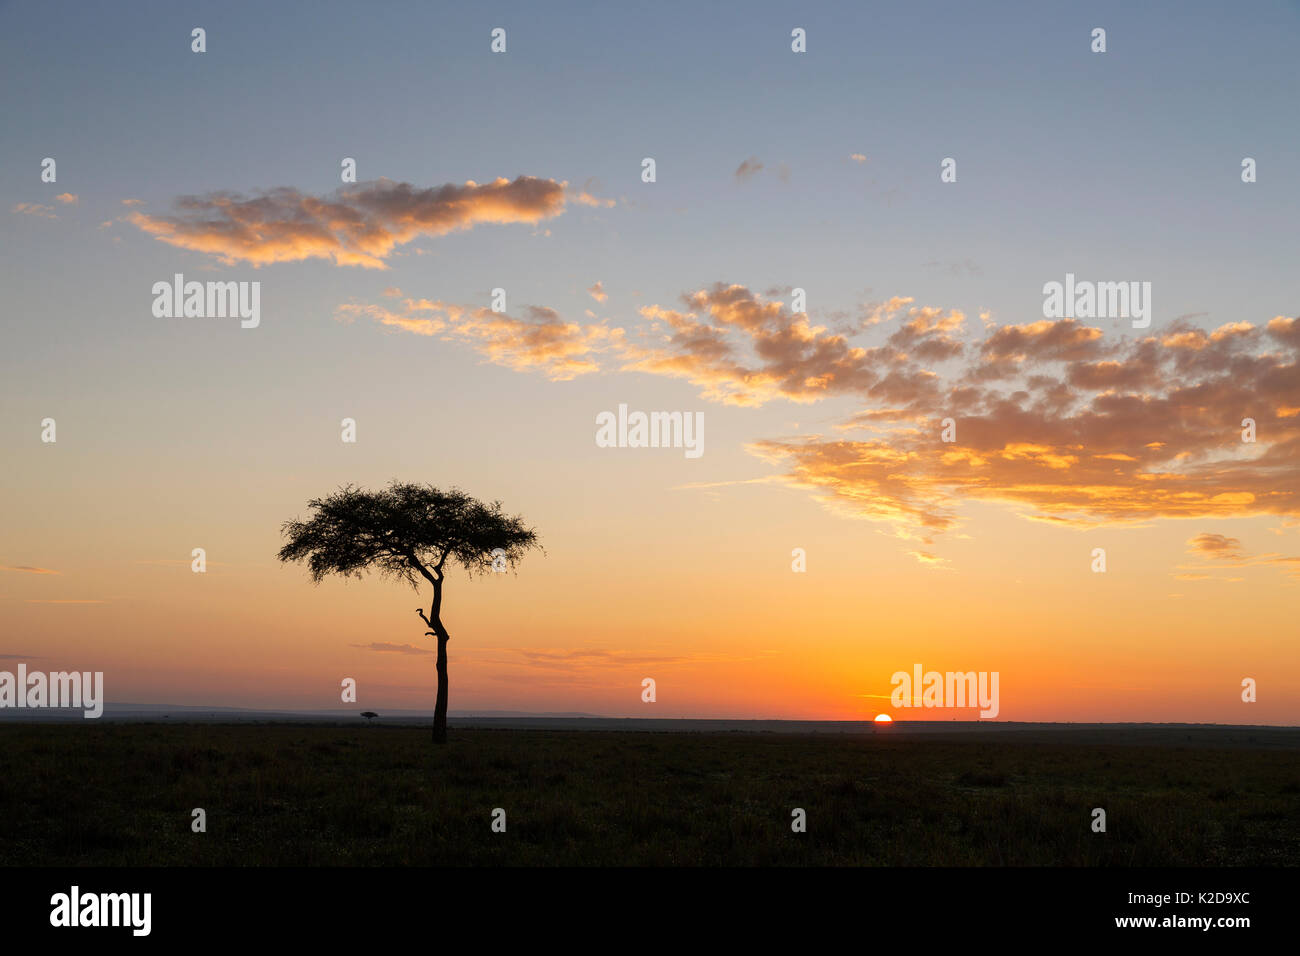 Sunrise in the Masai Mara National Reserve, with Whistling Thorn (Acacia drepanolobium) tree in picture, Kenya Stock Photo